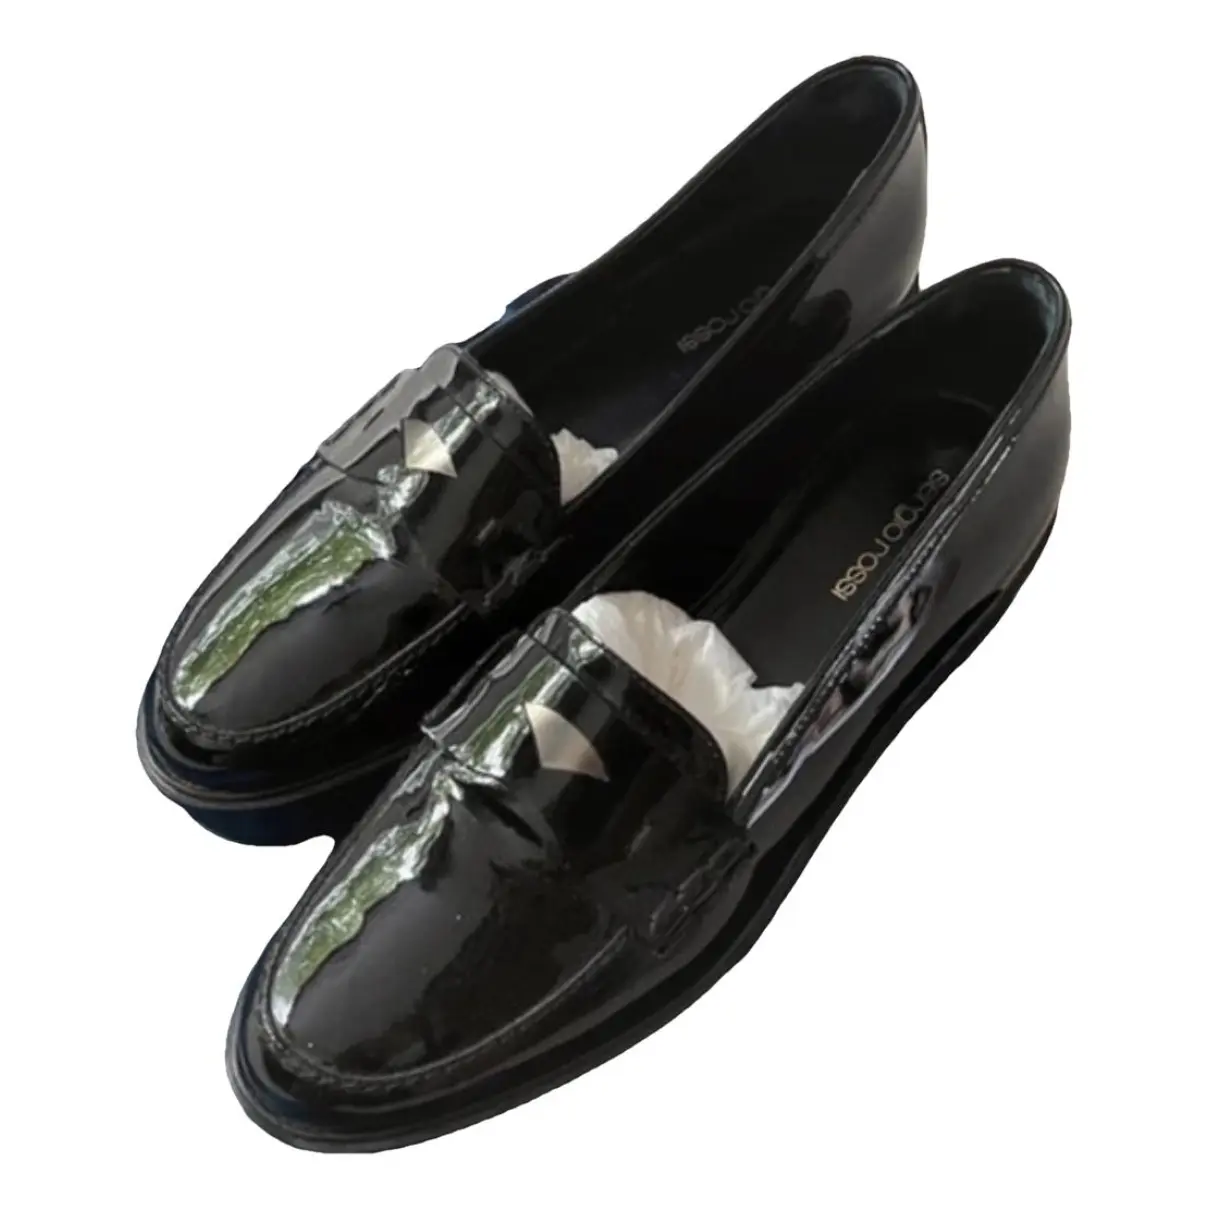 Patent leather mules & clogs